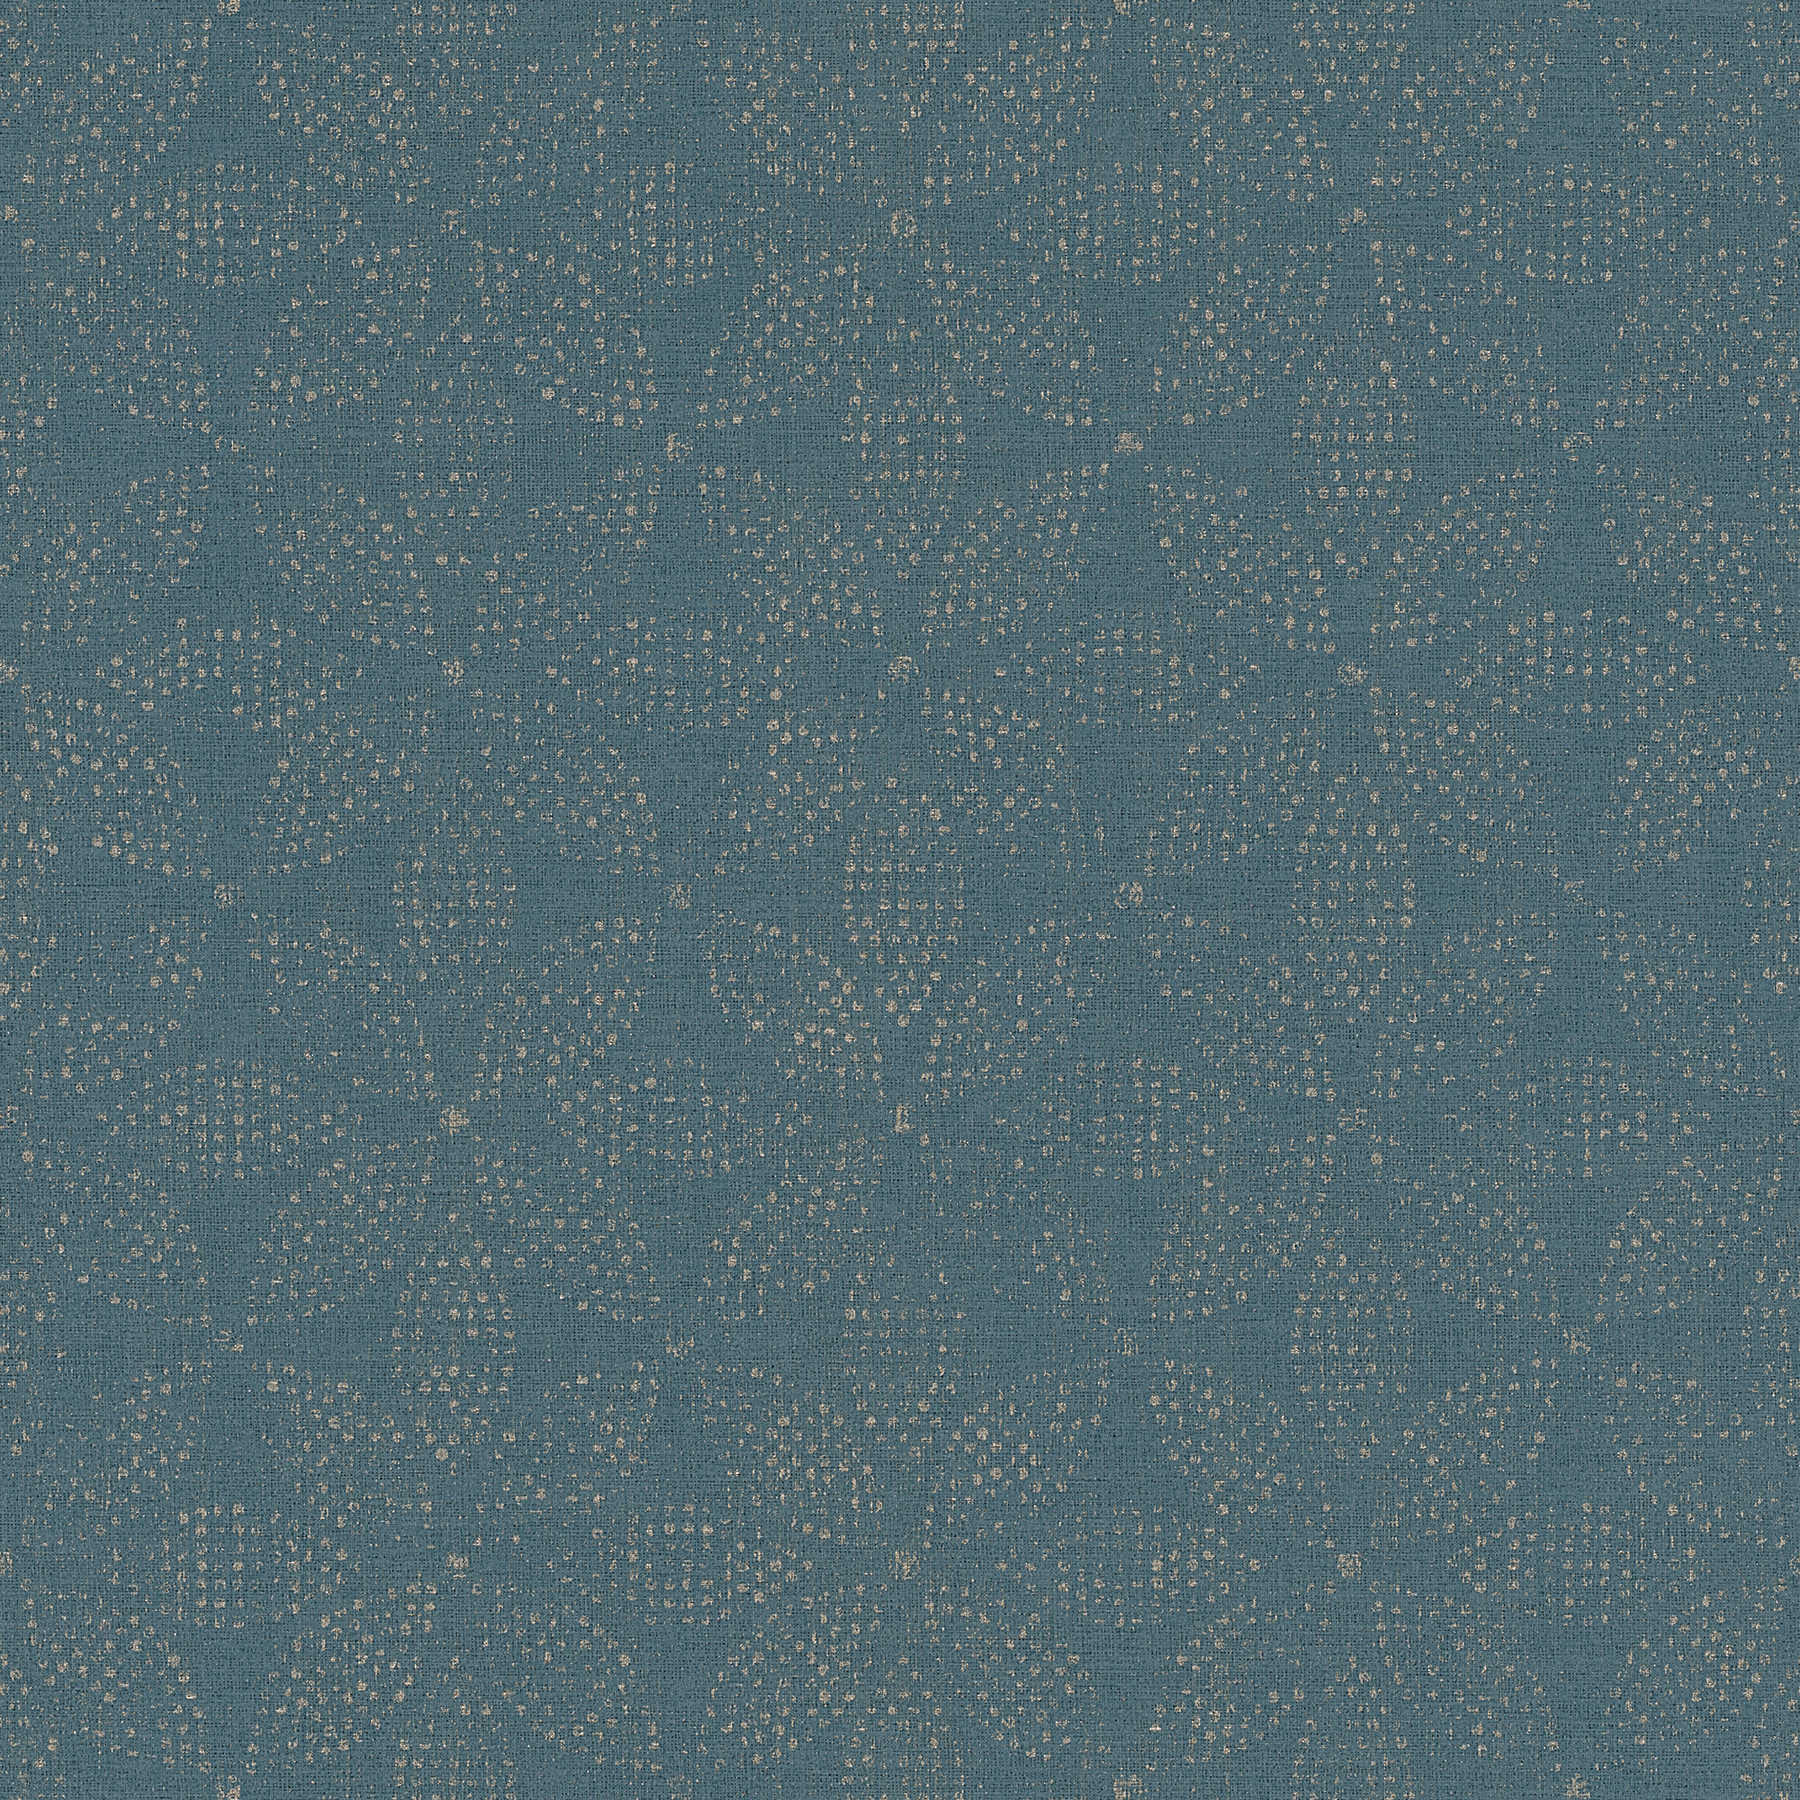         Pattern wallpaper African style graphic dot painting - blue, gold
    